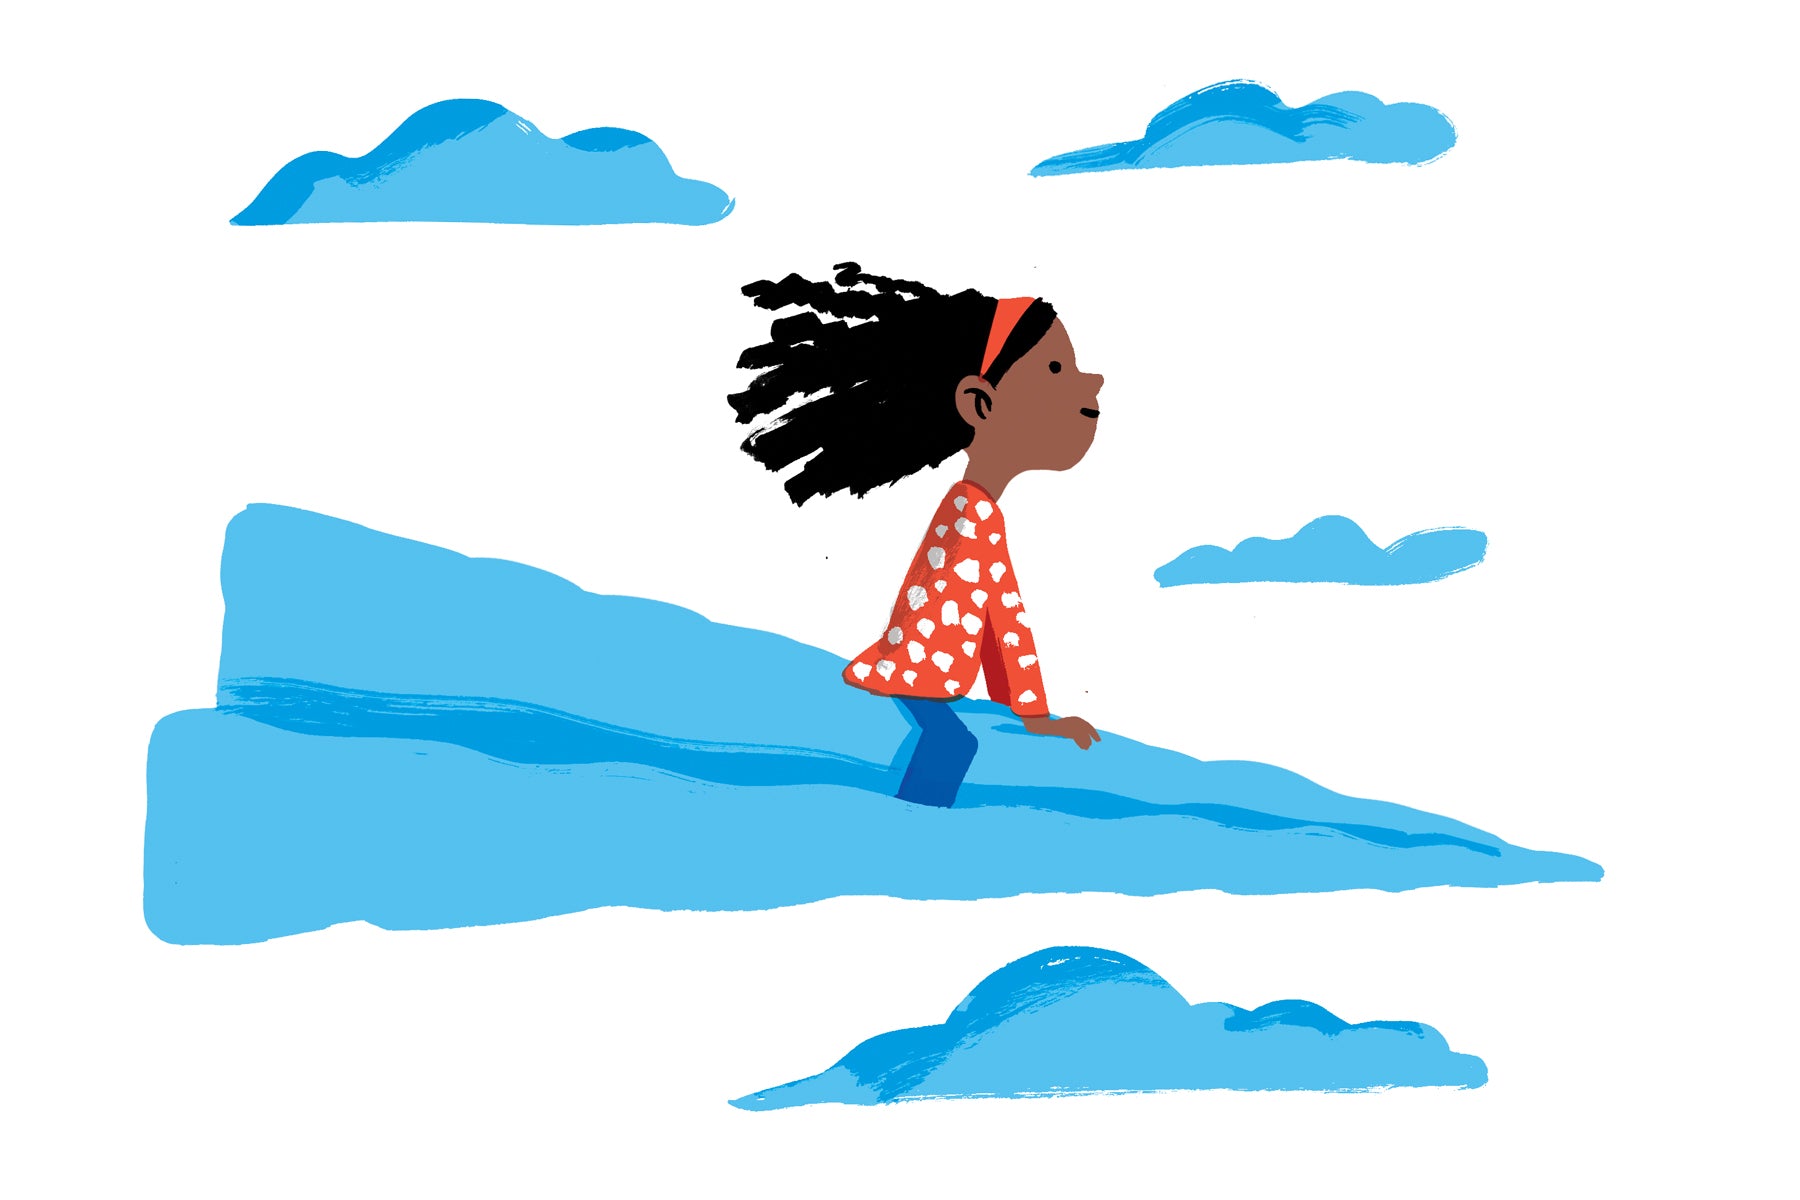 Illustration of a young black girl riding a paper airplane through the clouds. This is a metaphor for dreaming of her future as an entrepreneur. 